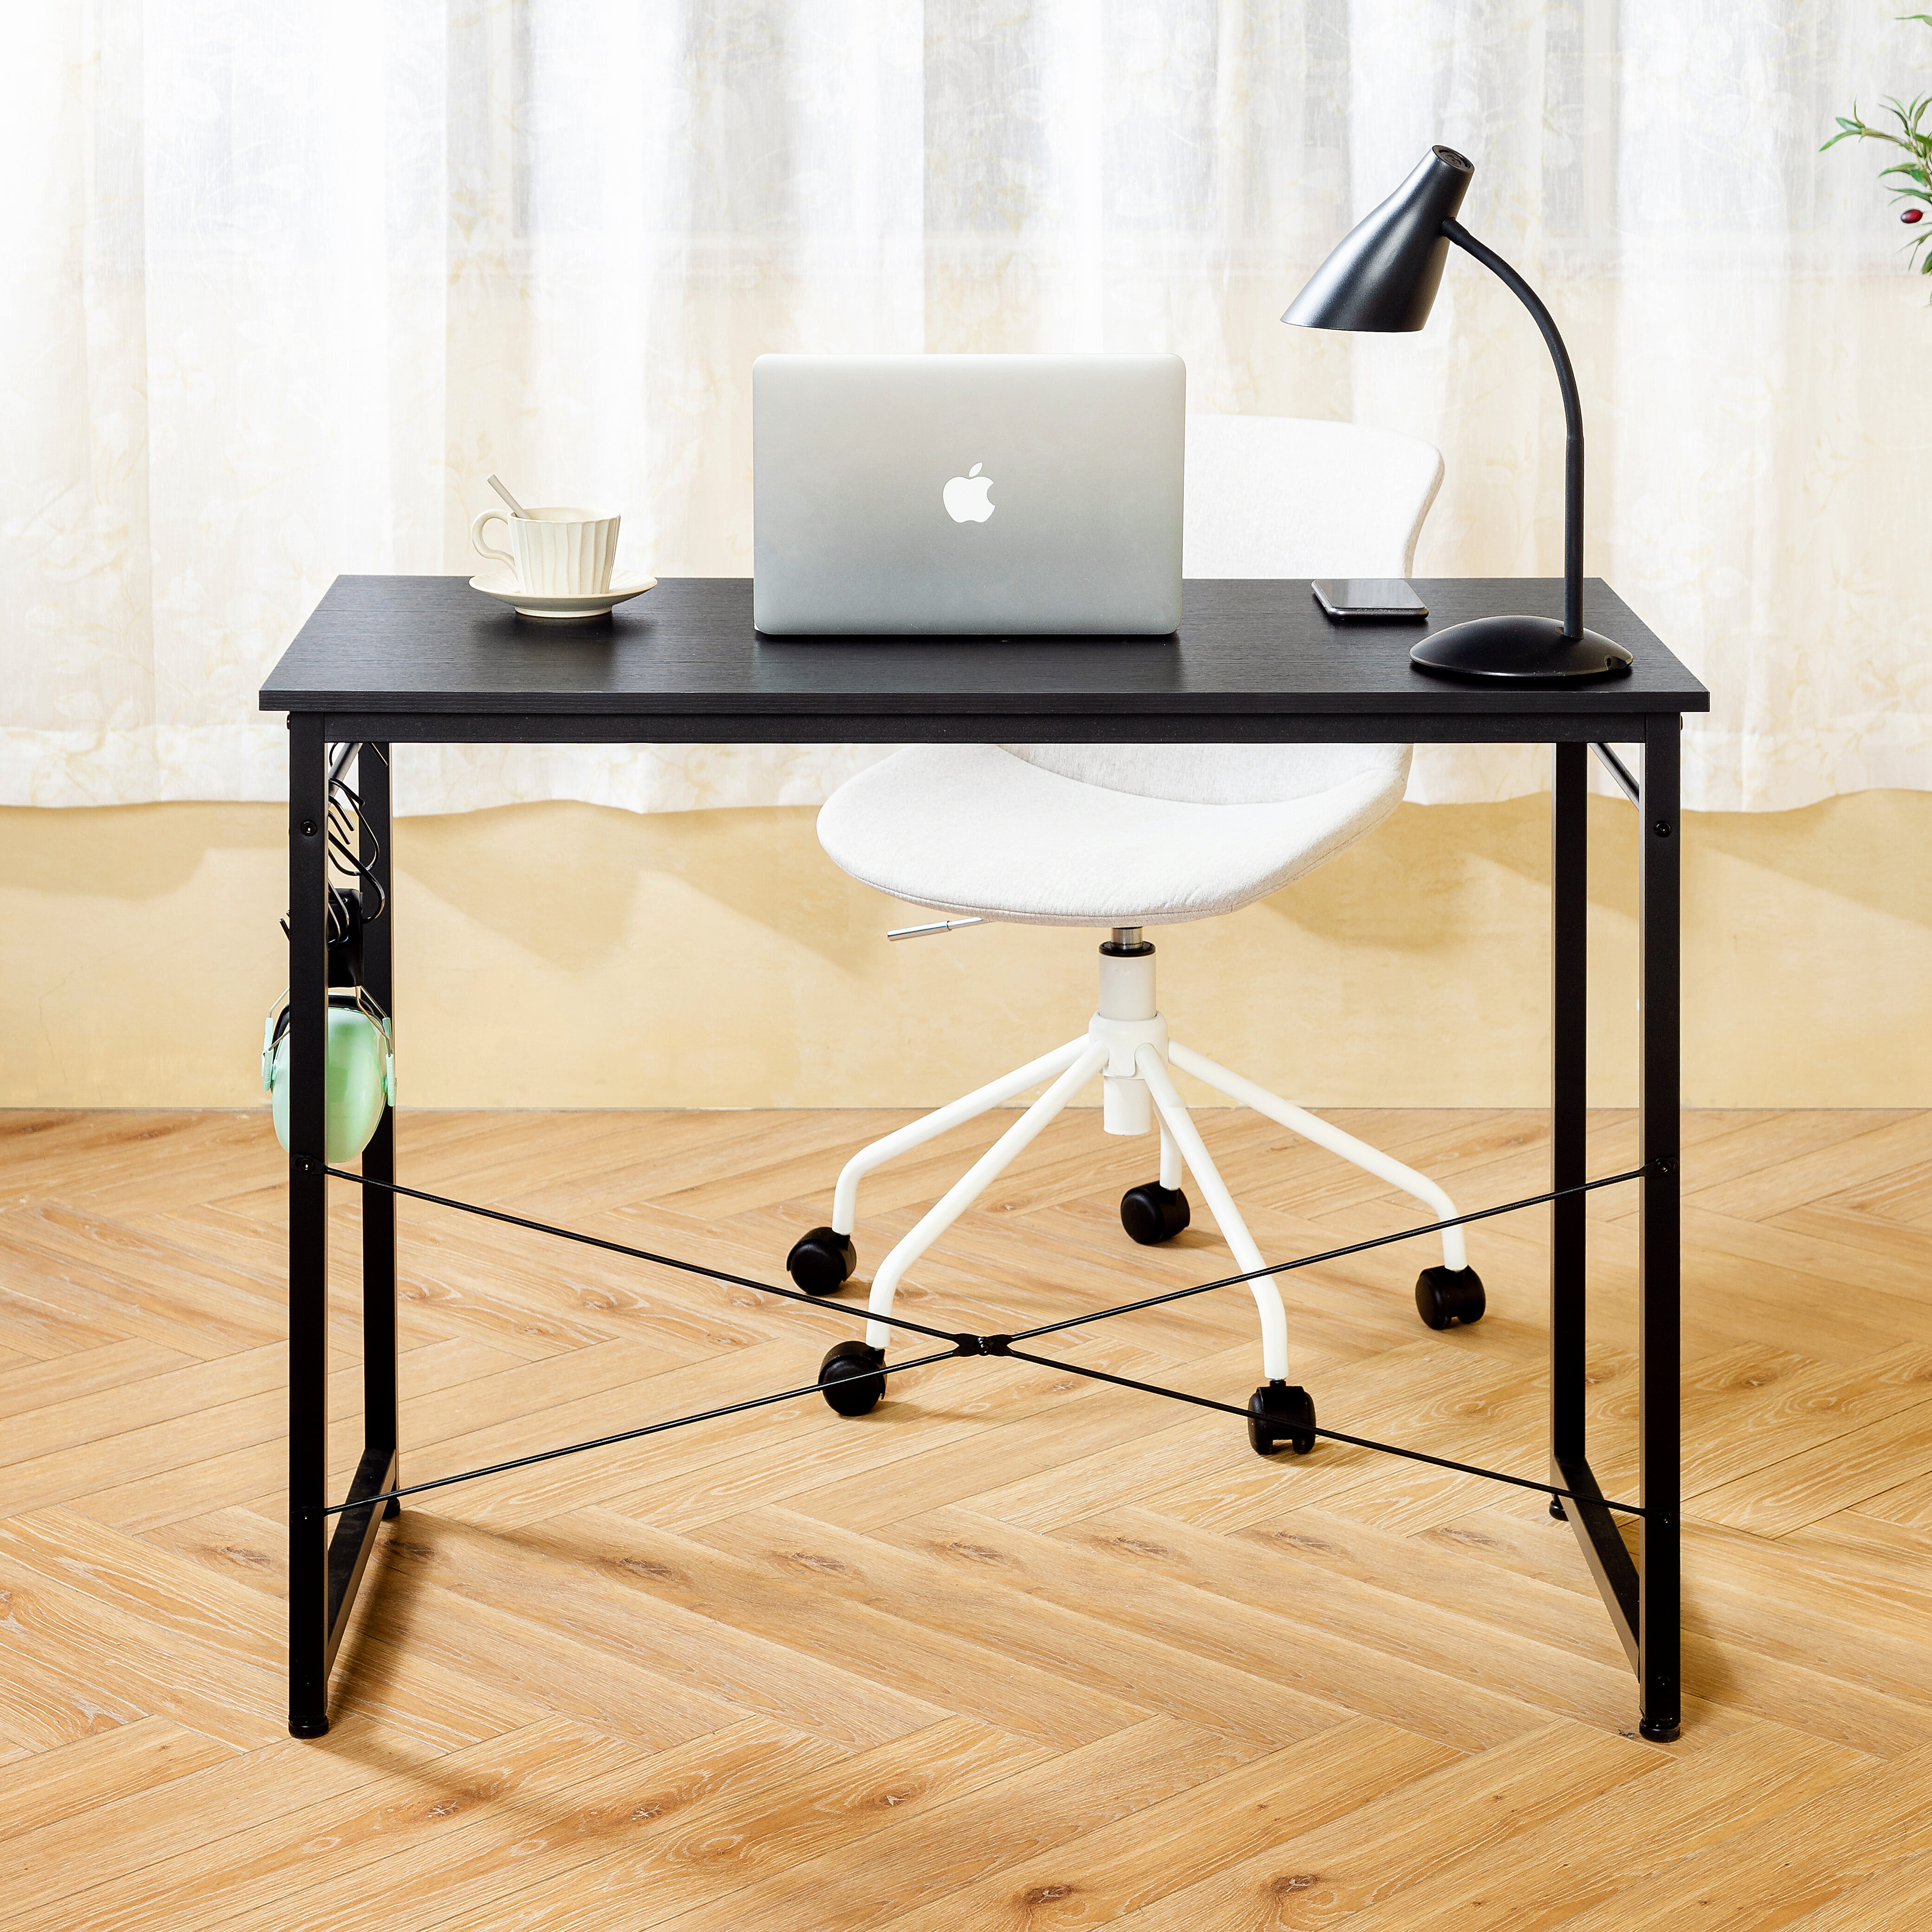 Details about   Simpless Computer Desk With Drawers Home Small Desk Office Writing Study Desk 